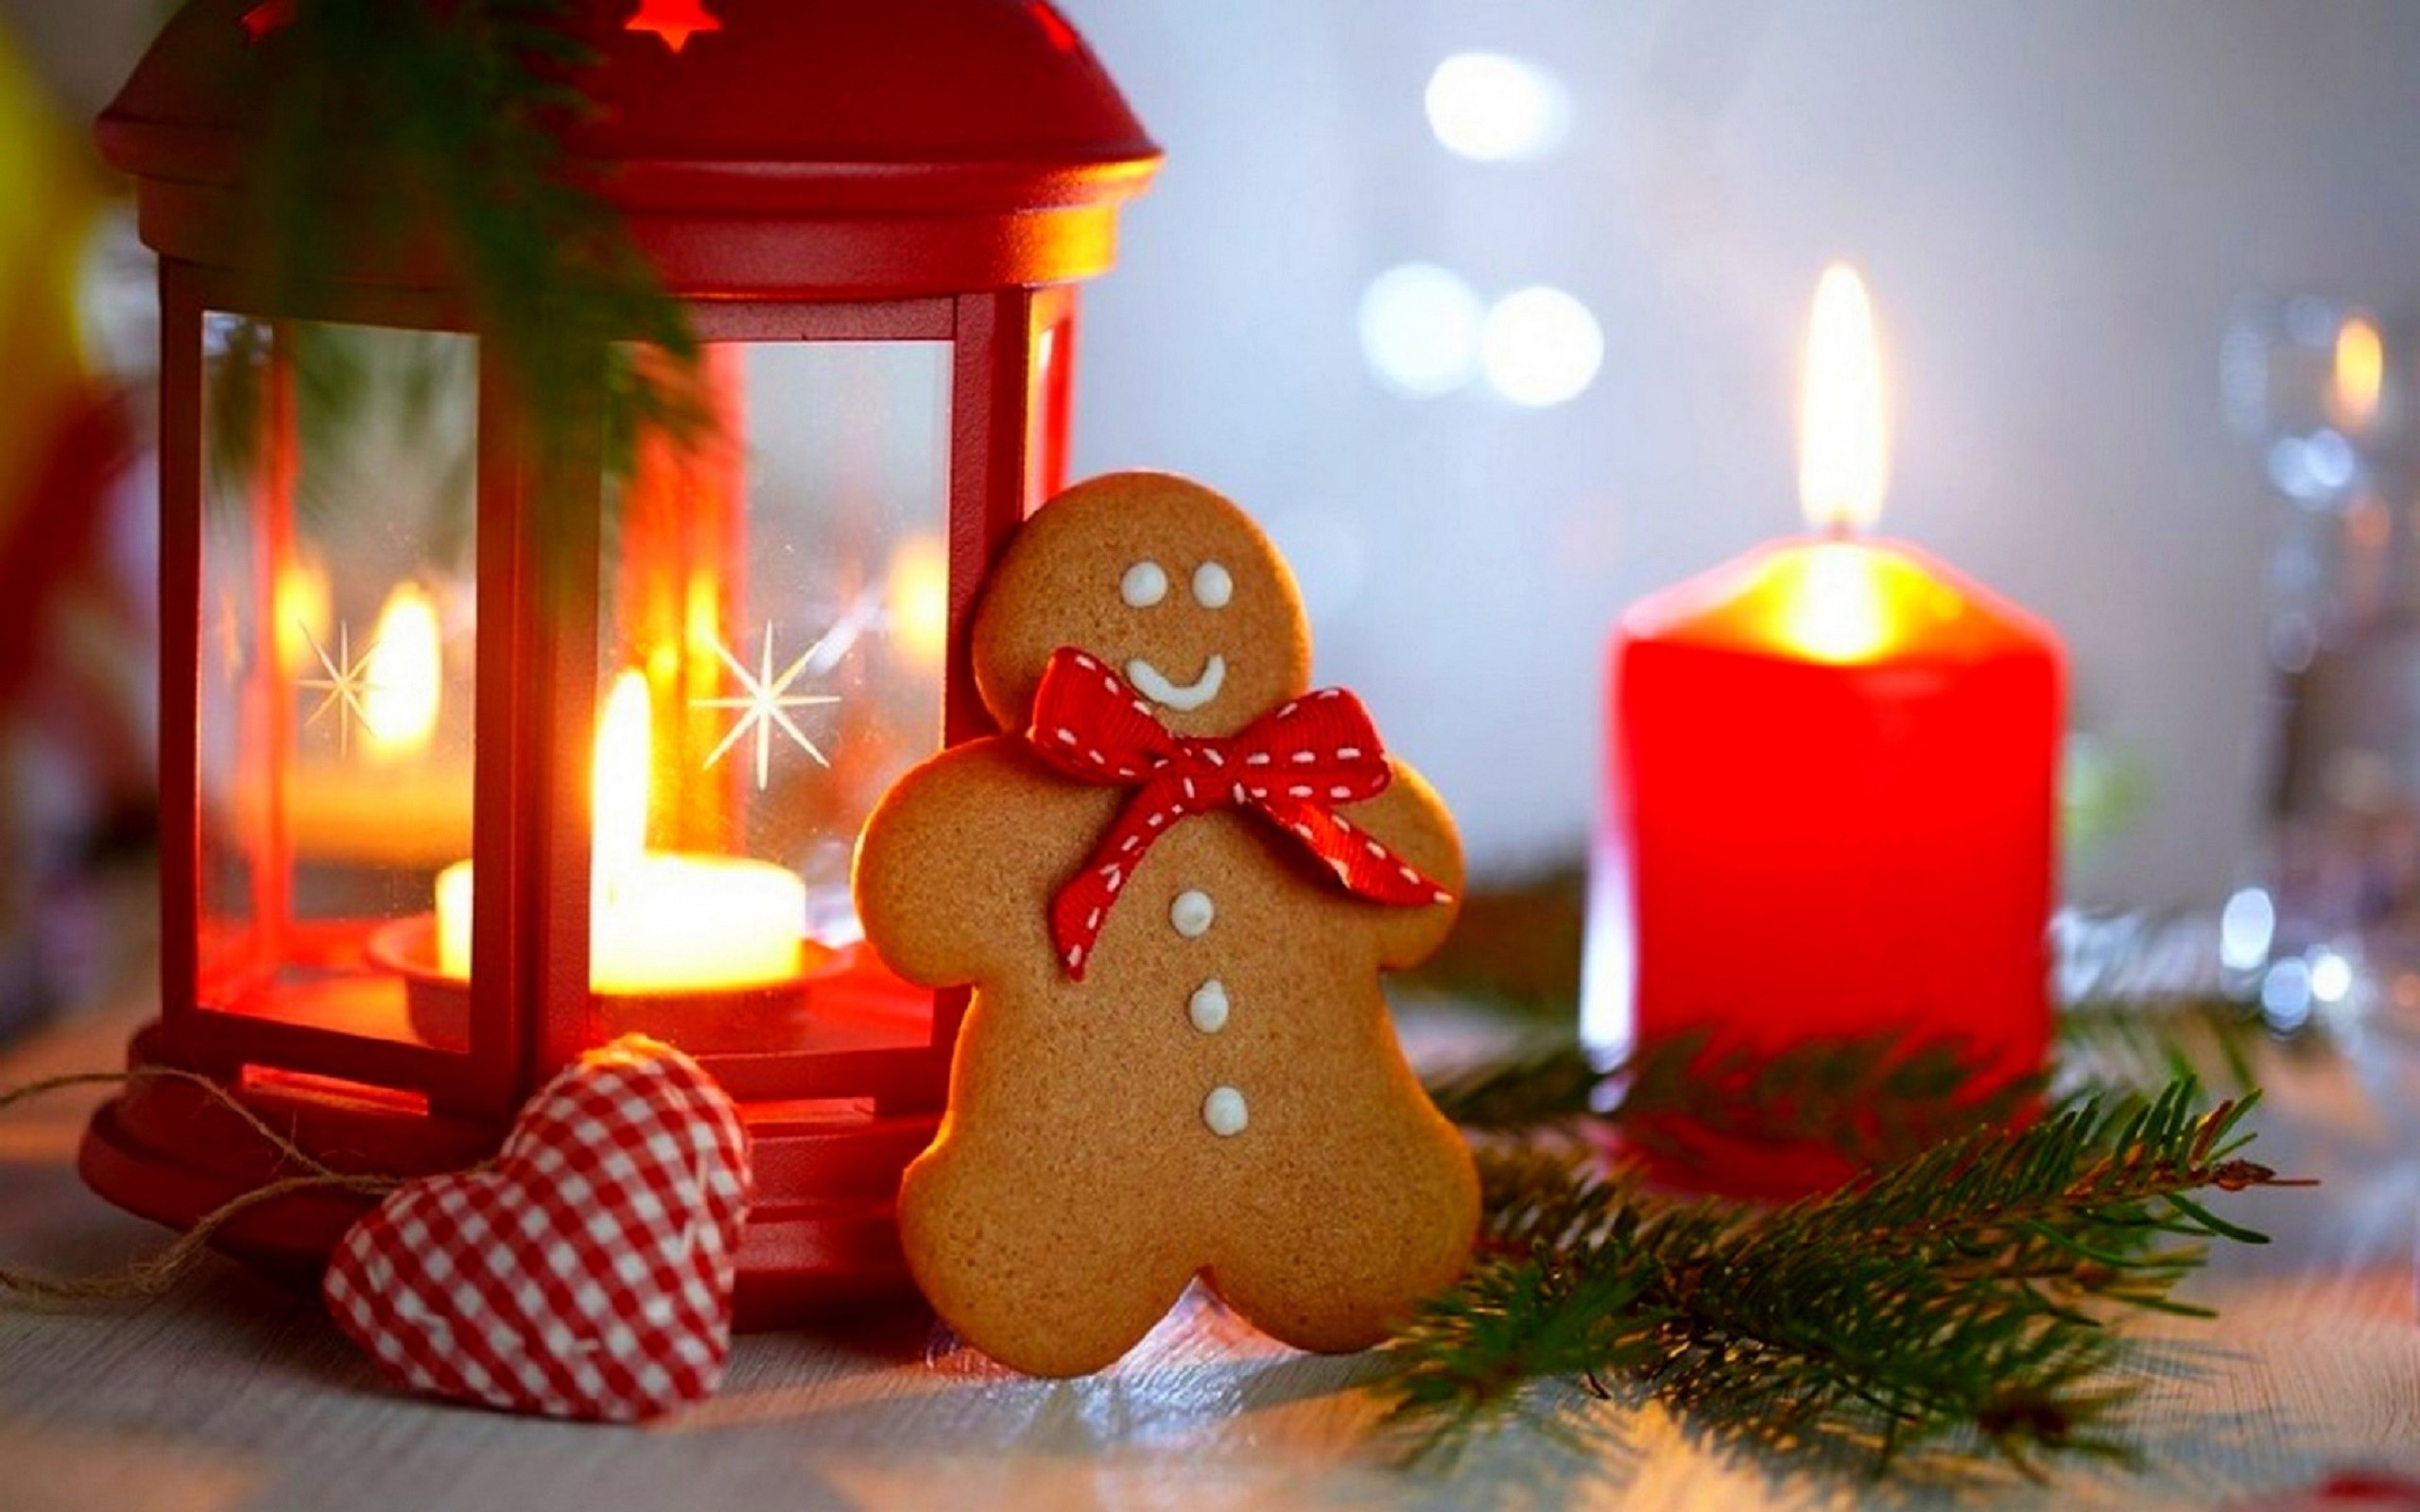 General 2560x1600 Christmas candles cookies